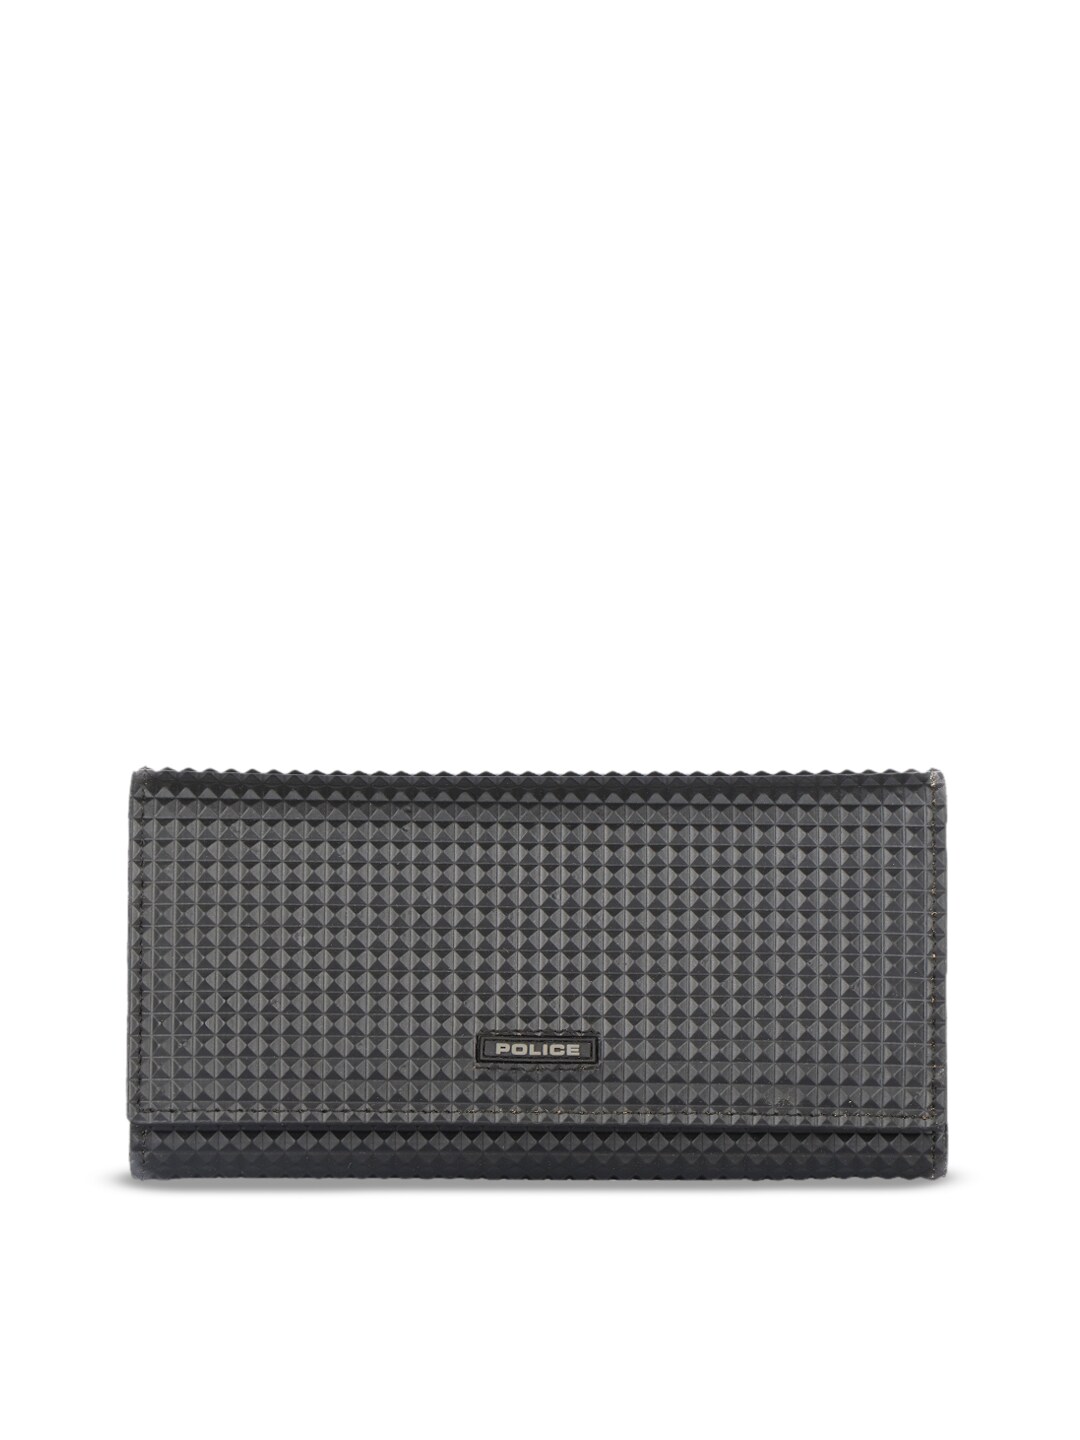 Police Women Black Textured Leather Envelope Wallet Price in India